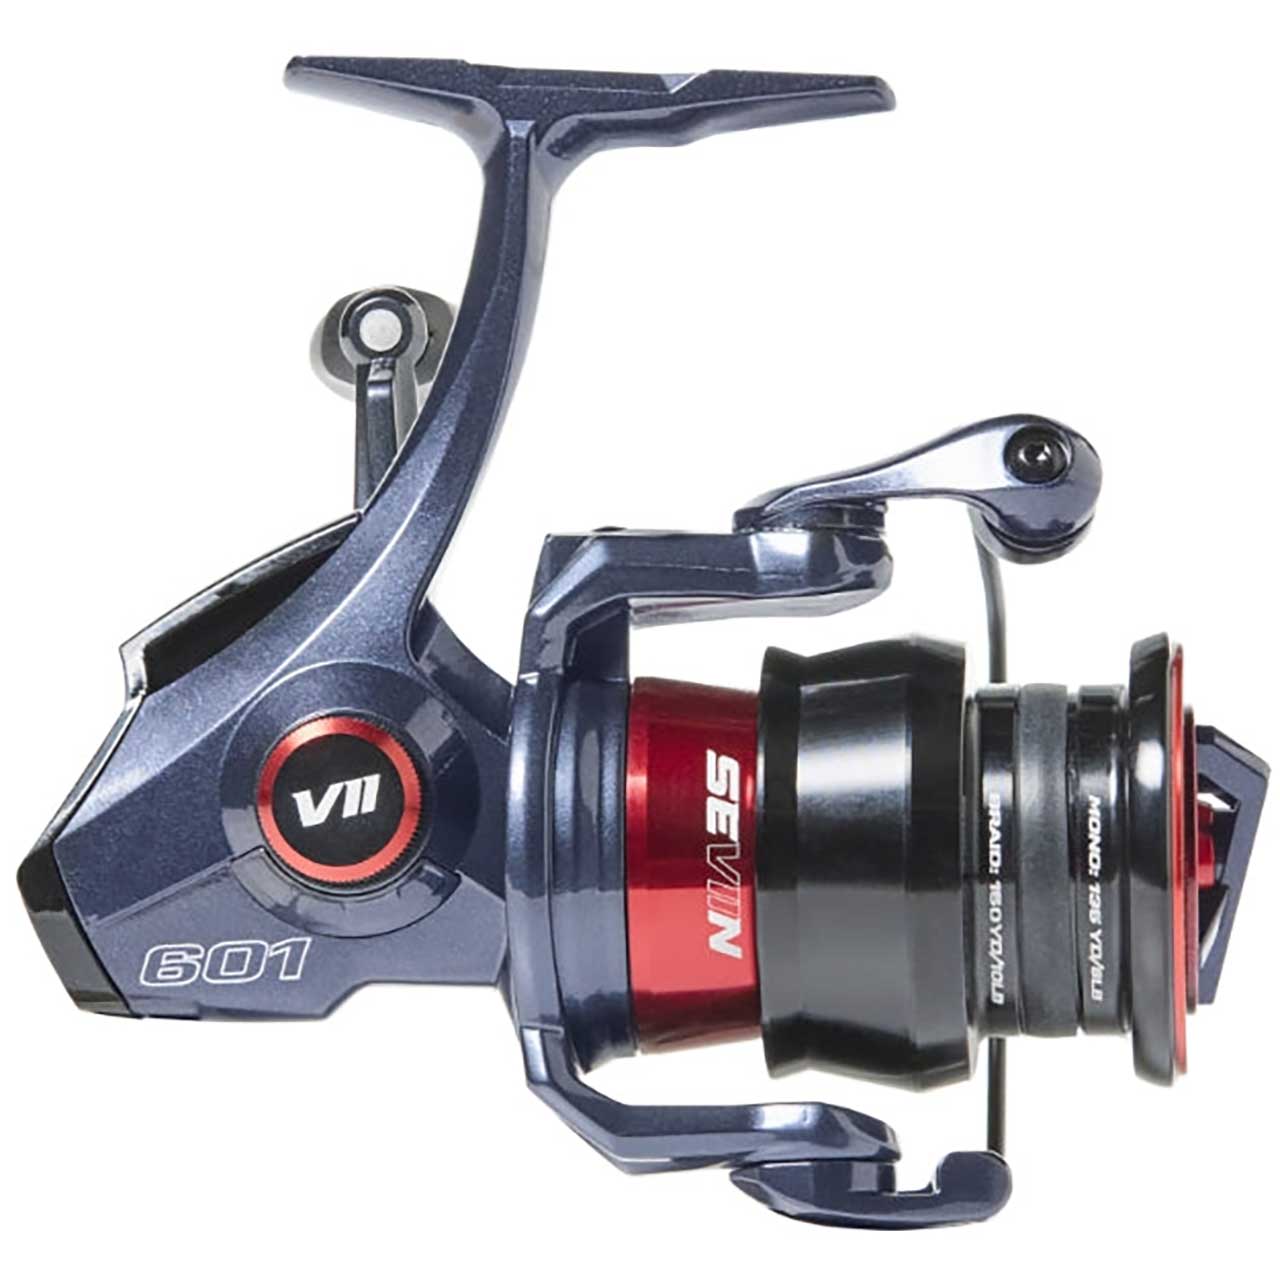 SEVIIN Reels: Durability Proven by Testing - Page 2 - Fishing Rods